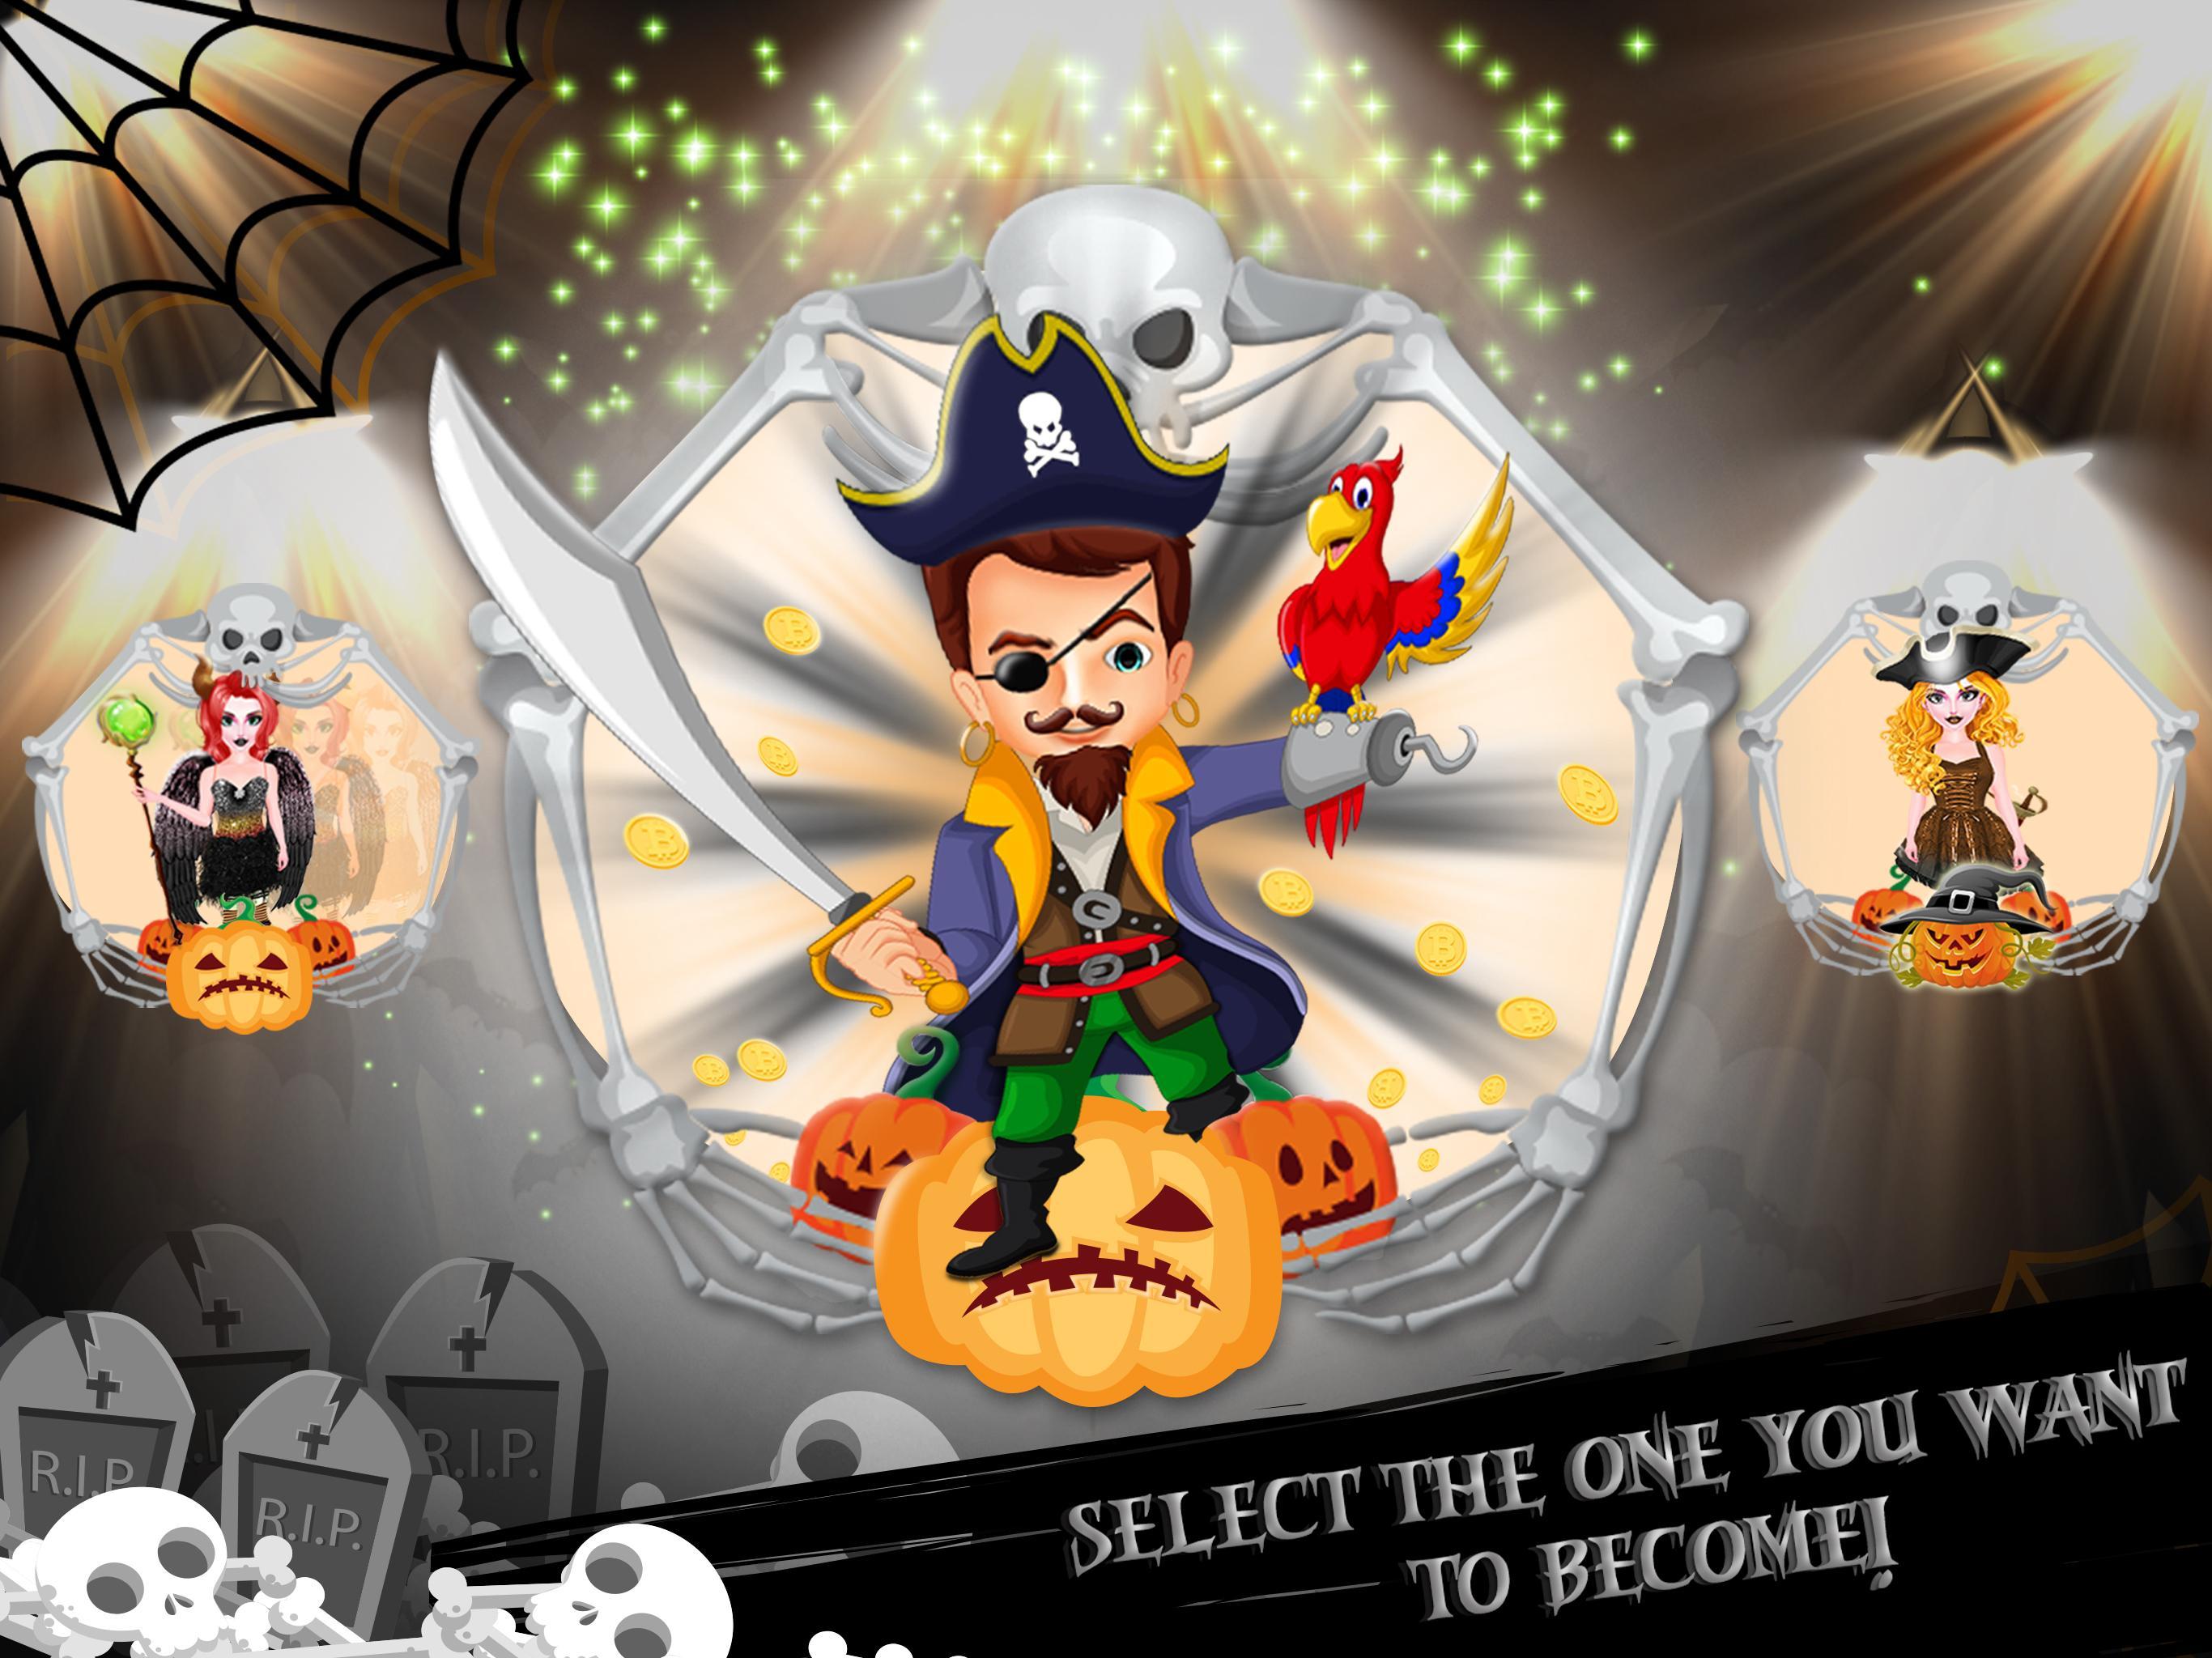 Halloween Fashion Girl Dress Up Halloween Games For Android Apk Download - spooky spin new outfits roblox